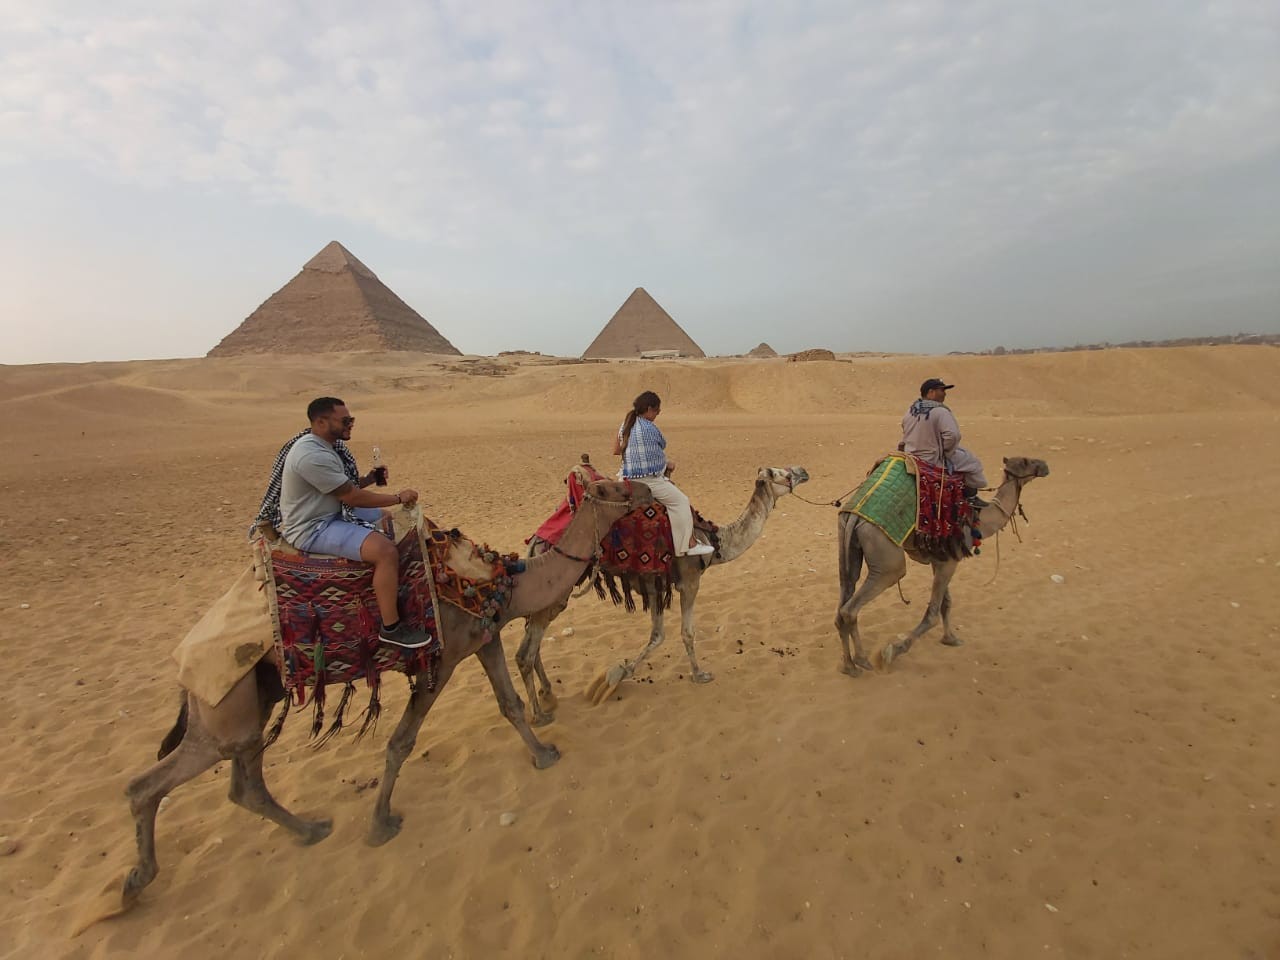 Cairo 4 Days Tour Package